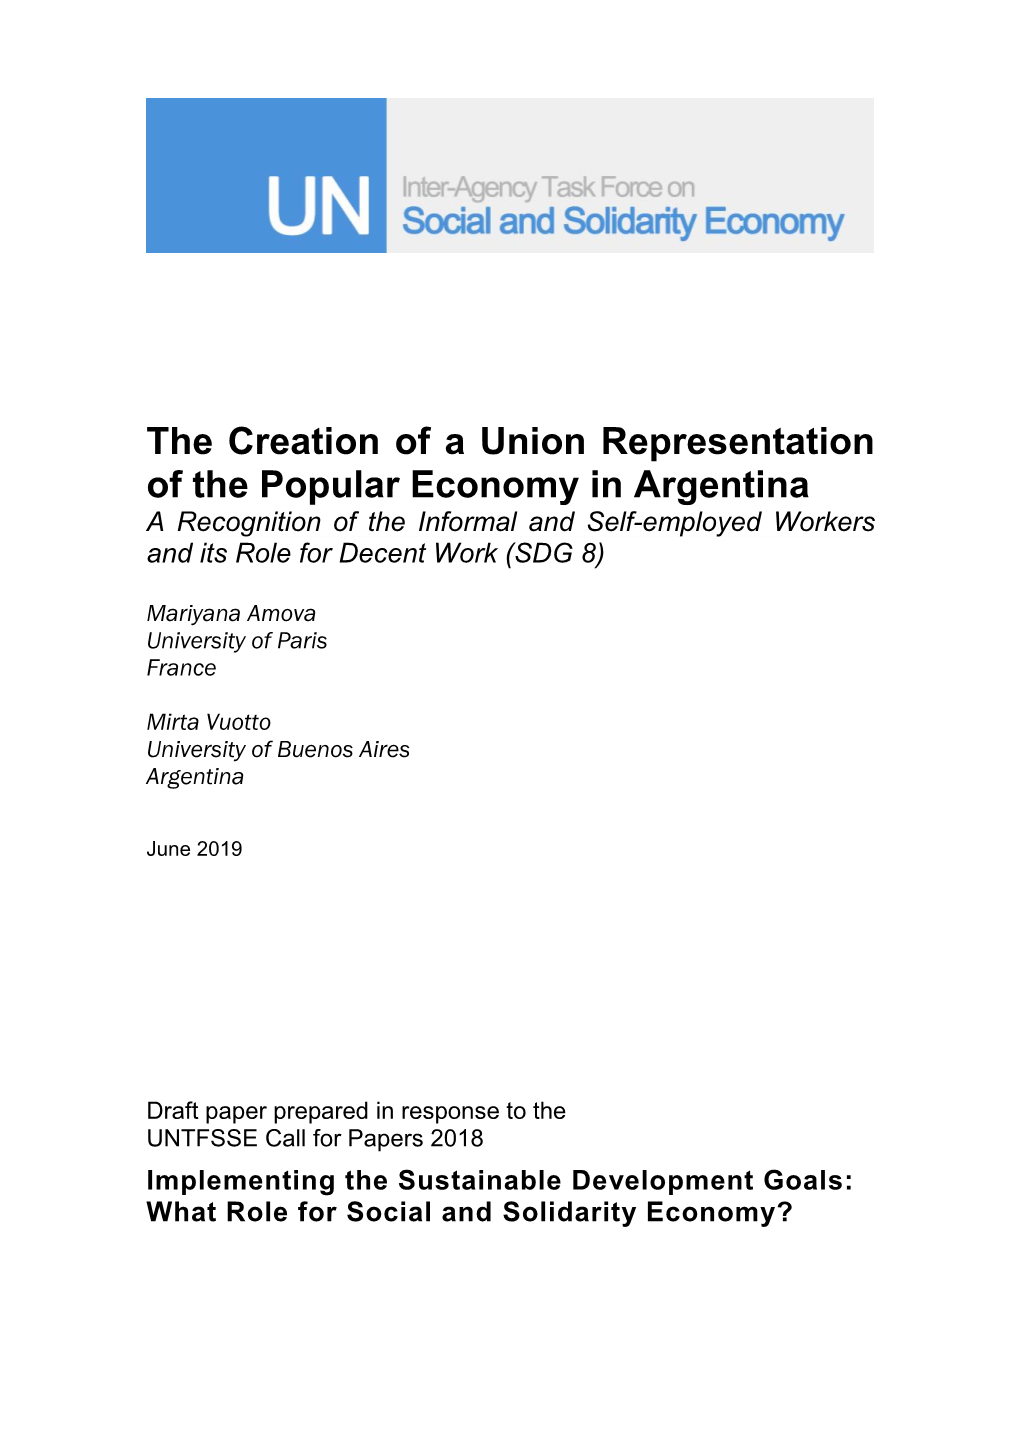 The Creation of a Union Representation of the Popular Economy in Argentina